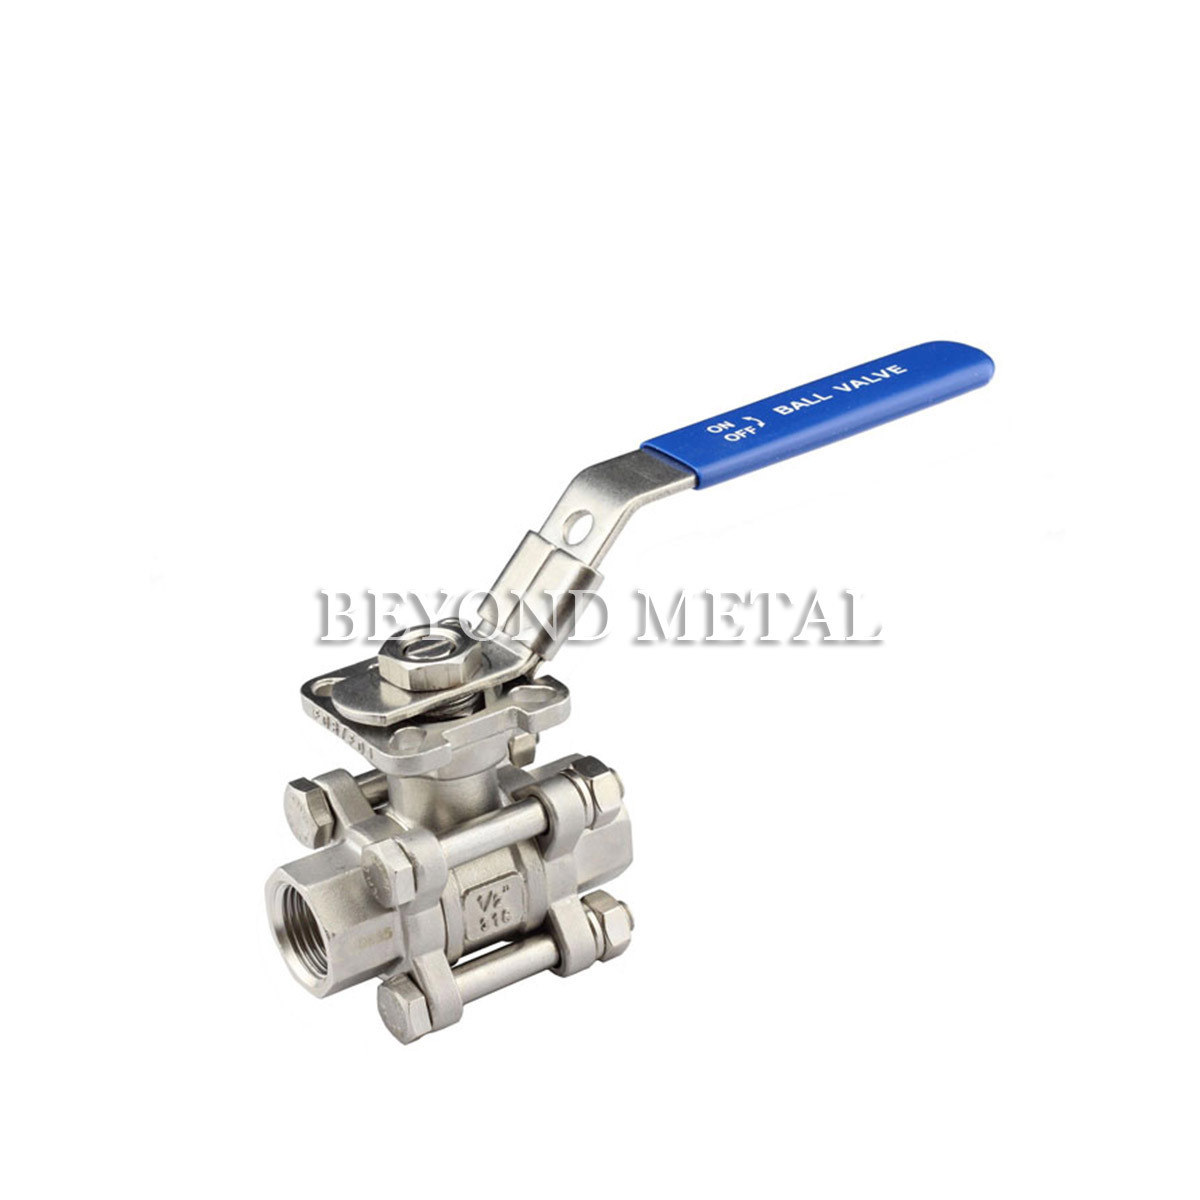 3PC BALL VALVE WITH MOUNTING PAD